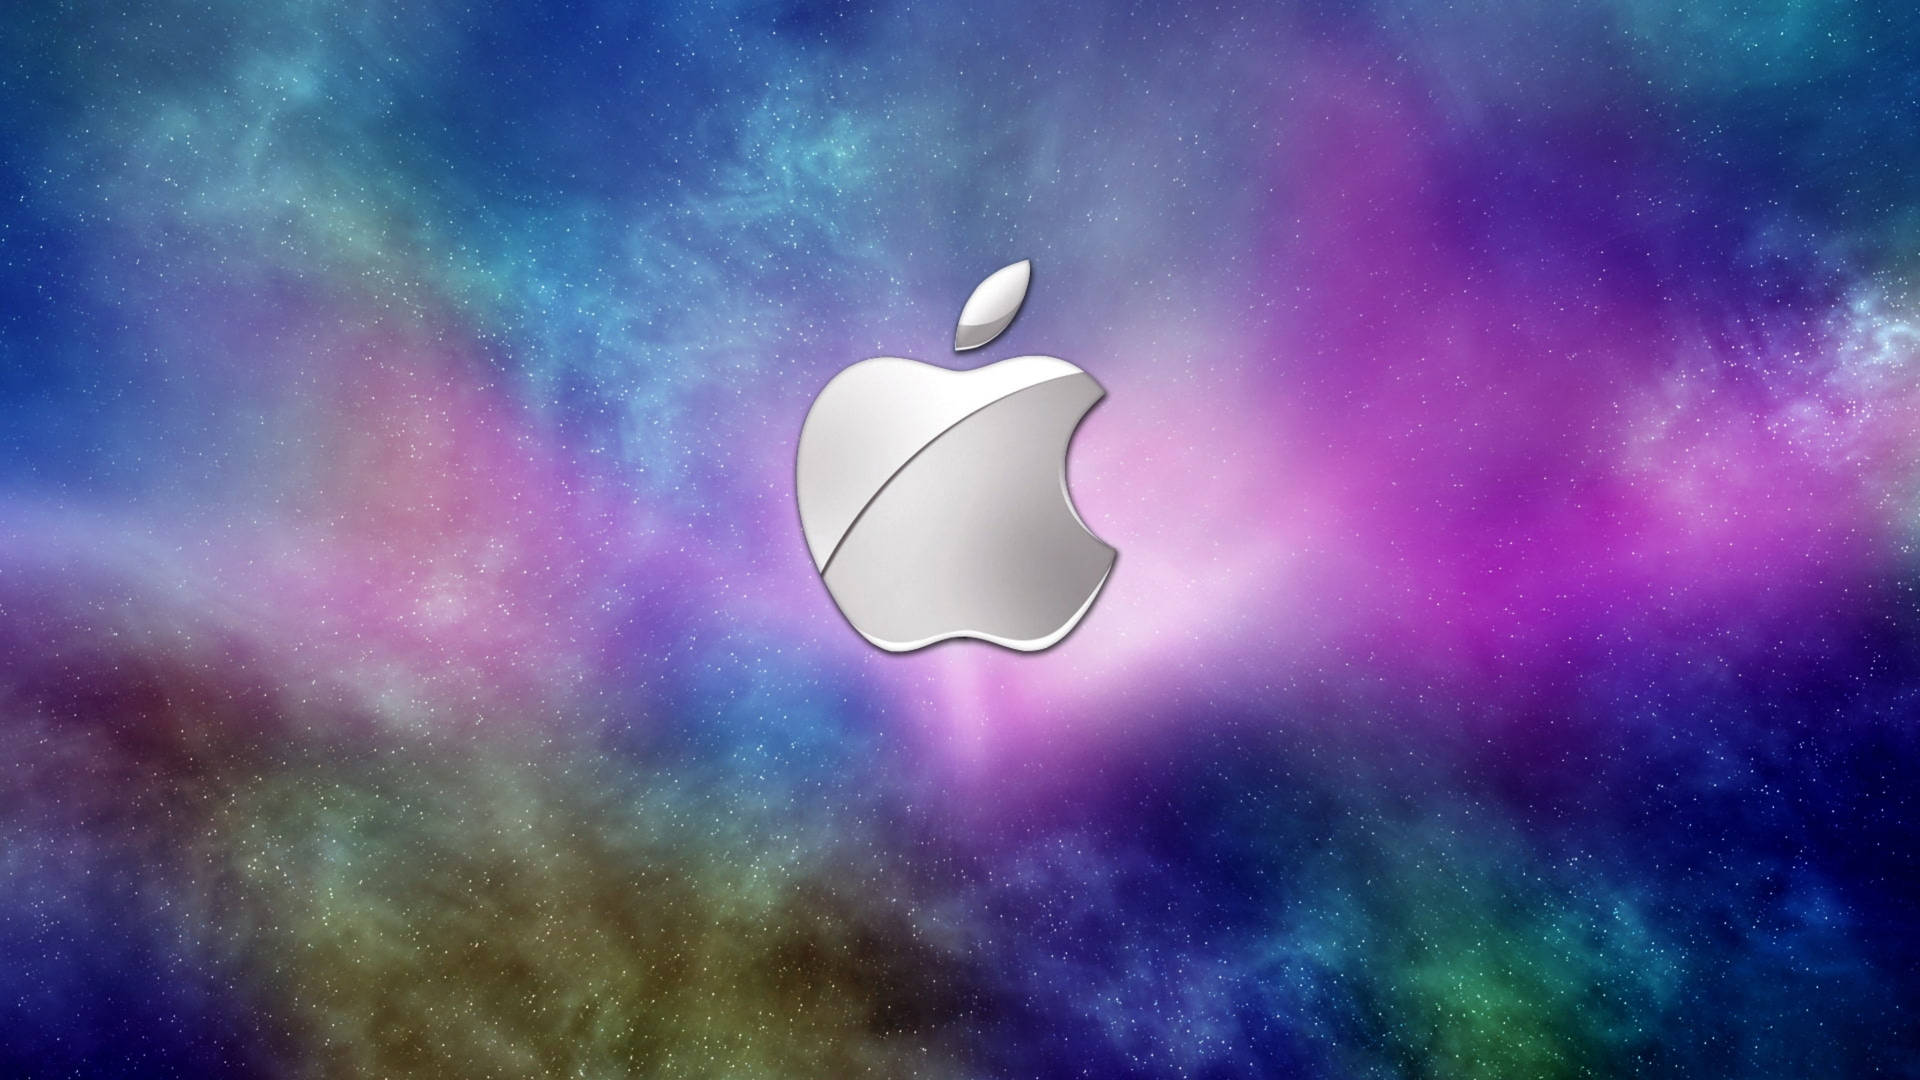 1080x1920 / 1080x1920 apple, computer, logo, hd, dark for Iphone 6, 7, 8  wallpaper - Coolwallpapers.me!